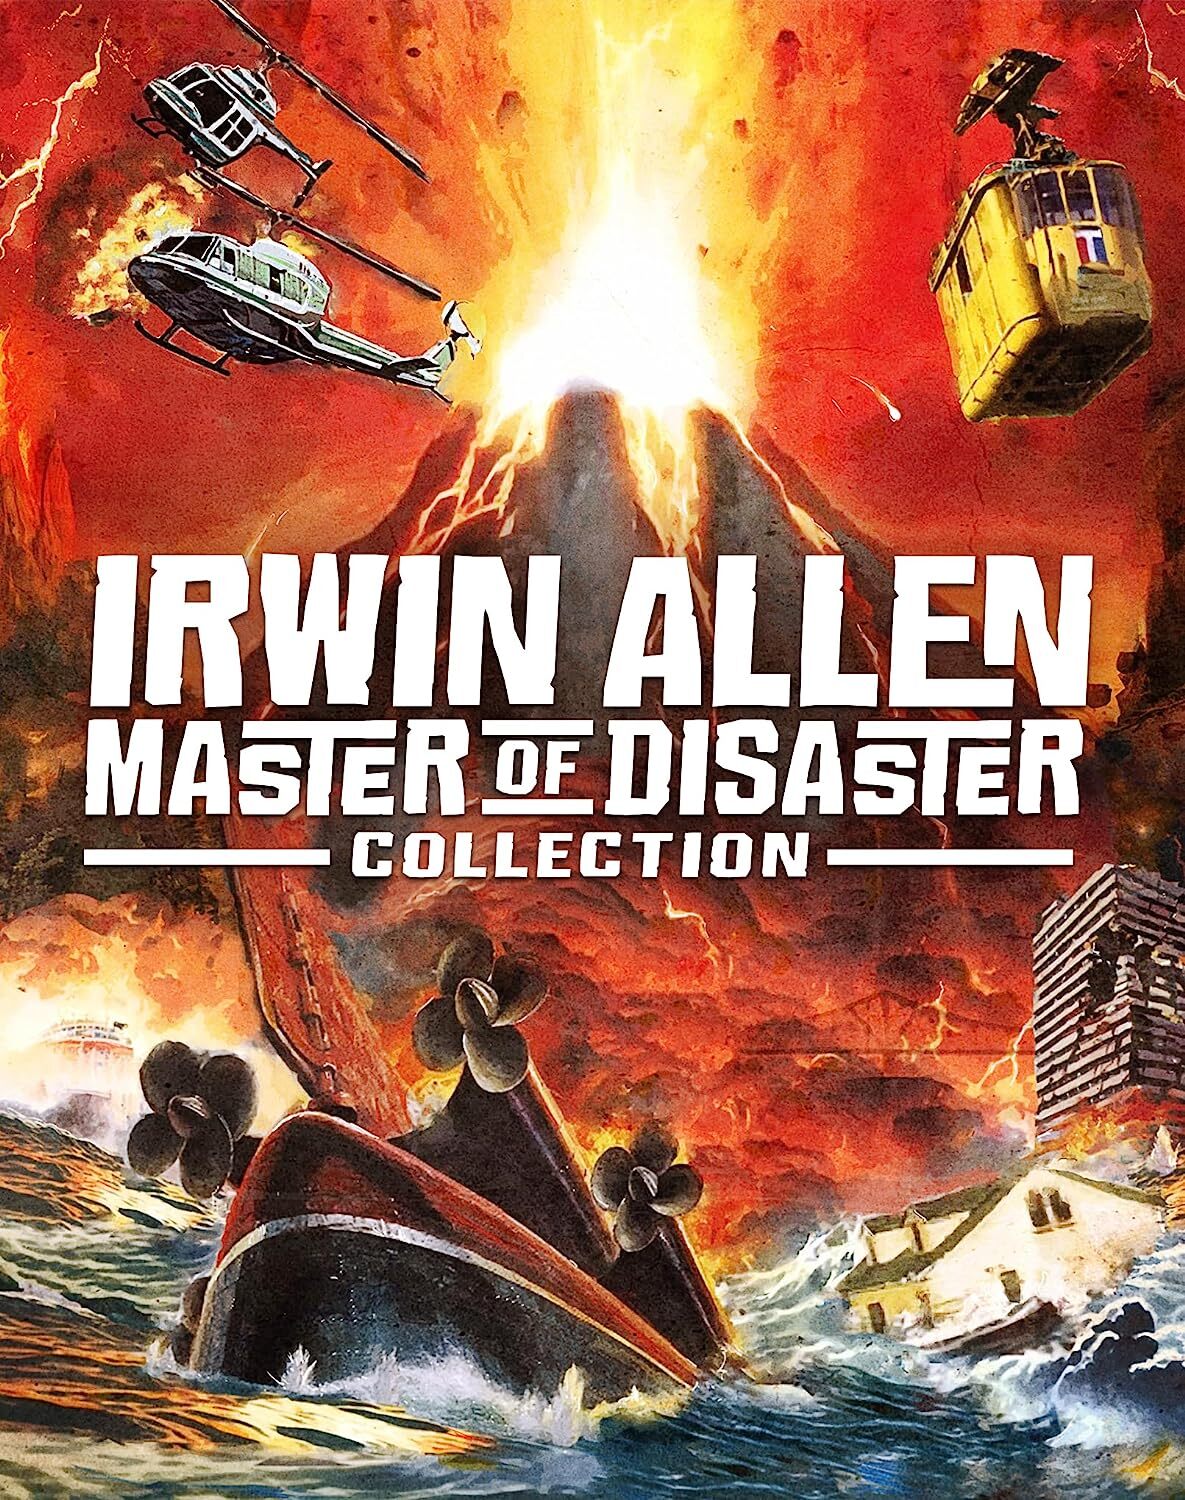 Irwin Allen: Master of Disaster Collection